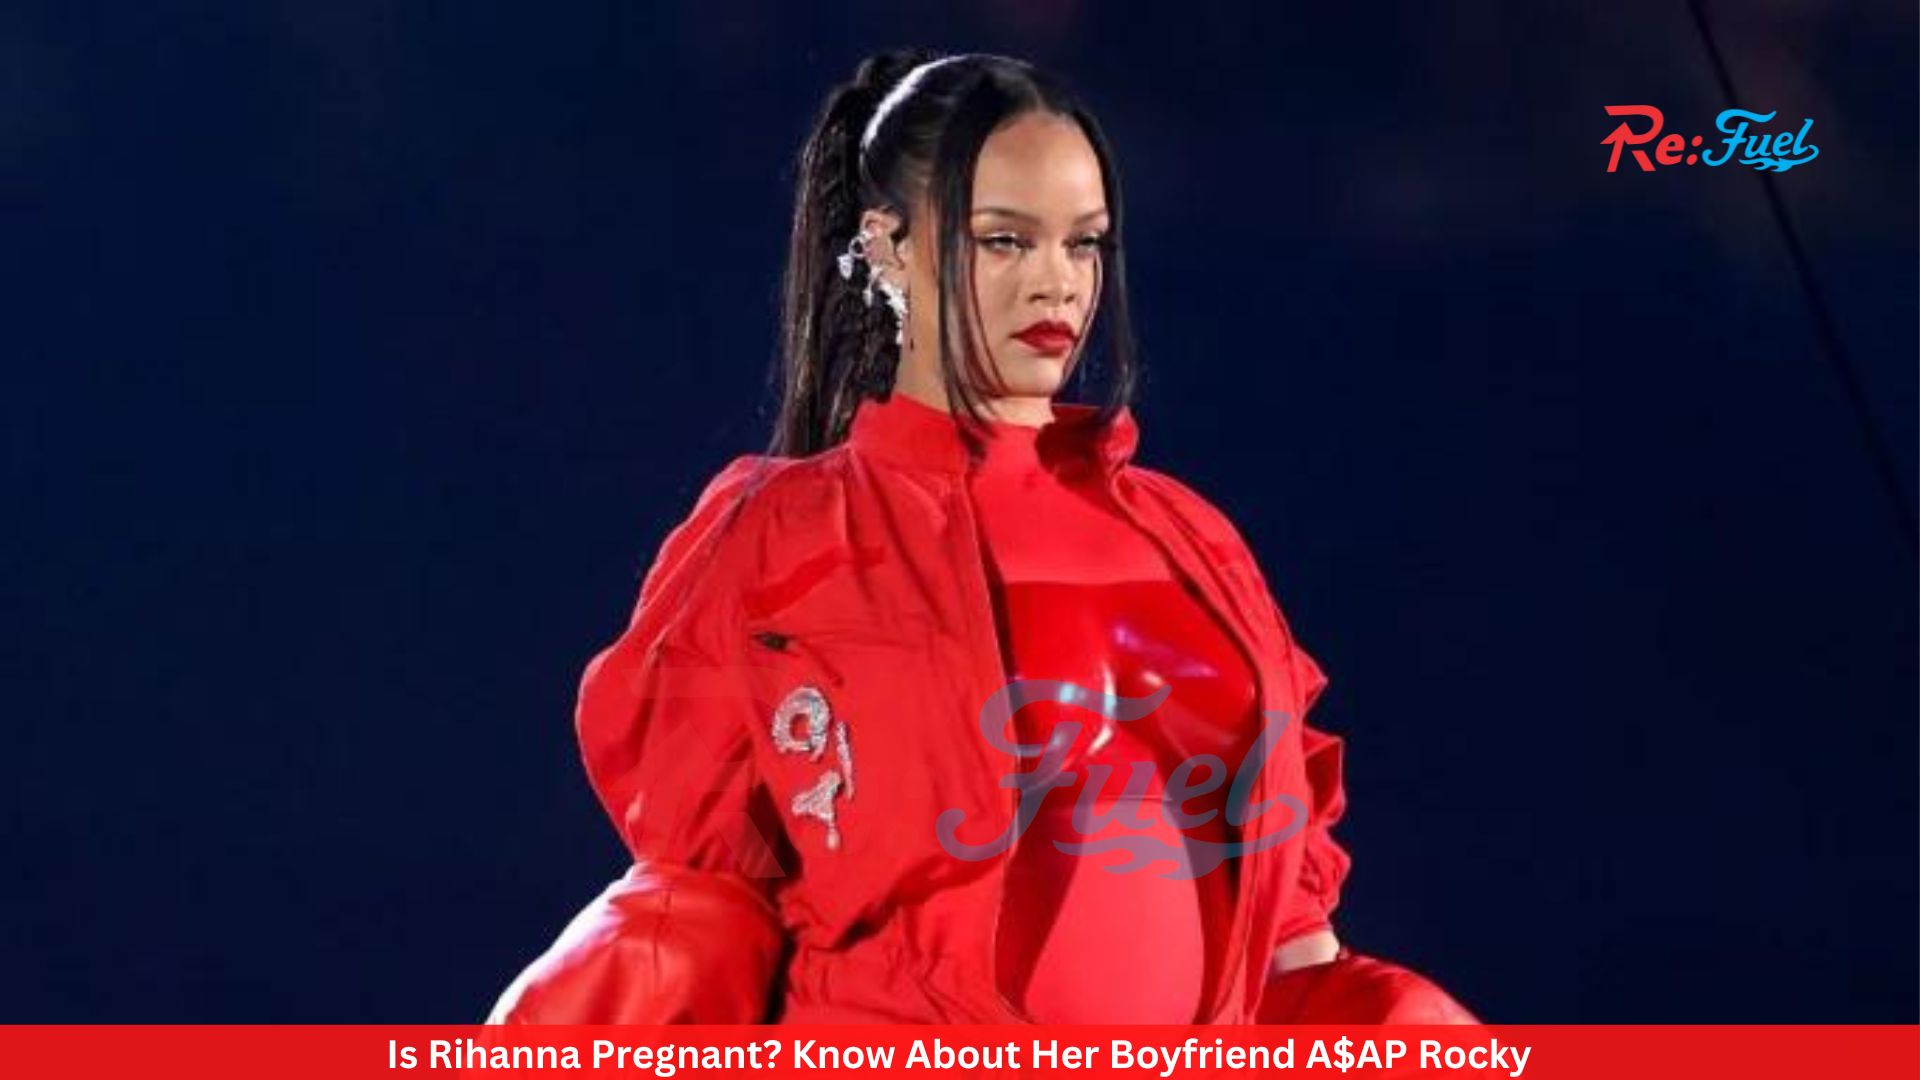 Is Rihanna Pregnant? Know About Her Boyfriend A$AP Rocky